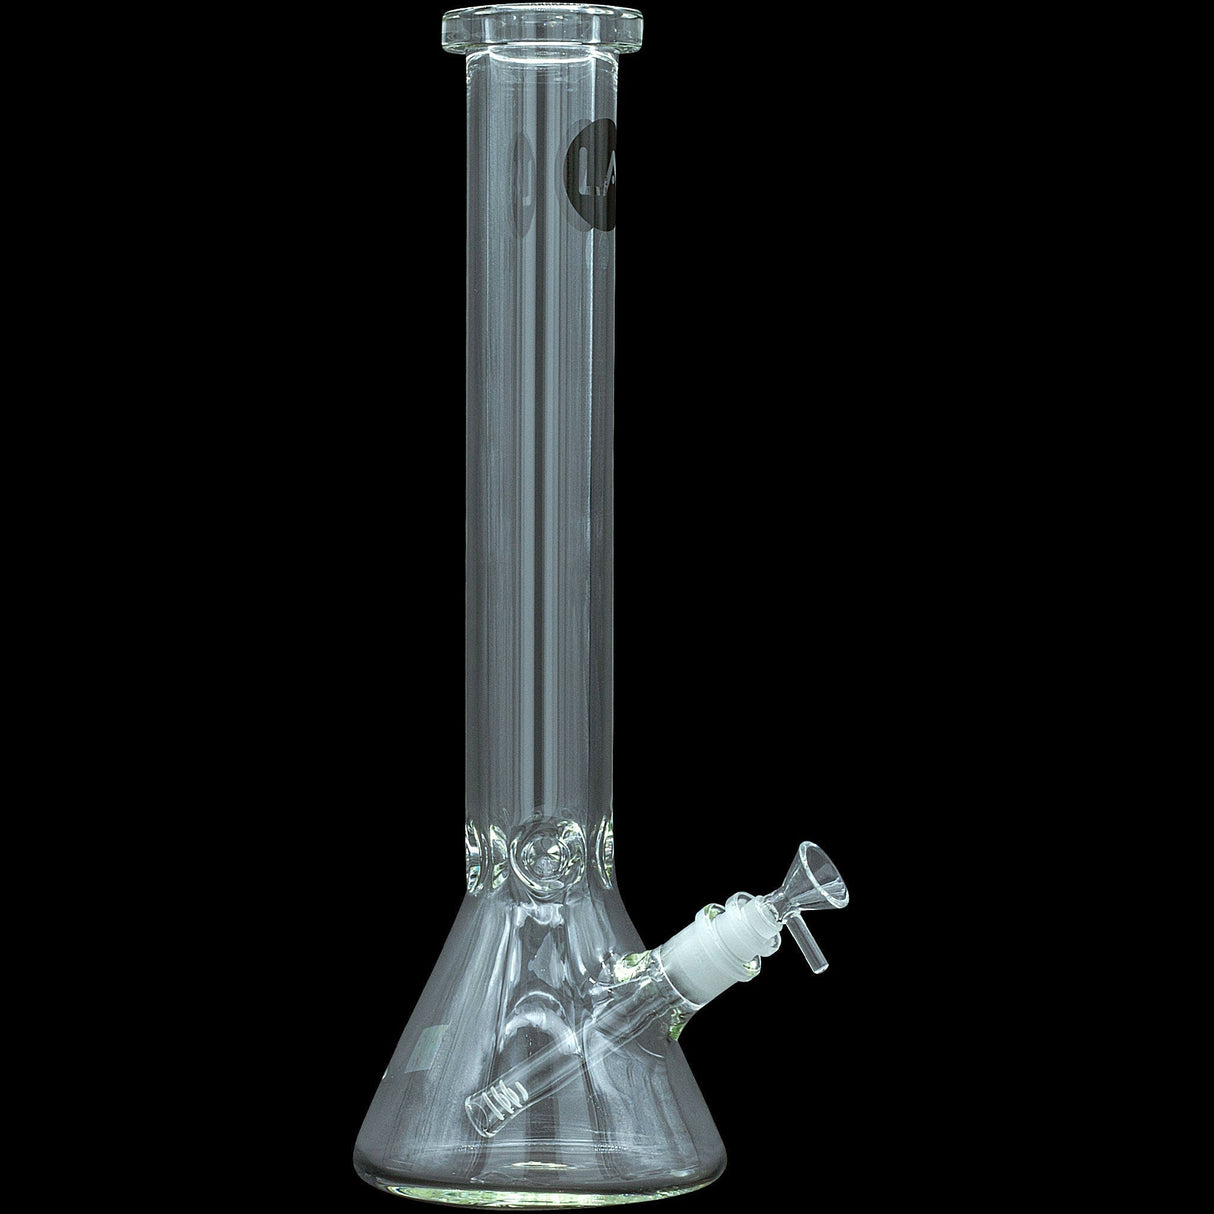 LA Pipes "Squared Up" Clear Beaker Bong, 9mm Thick Borosilicate Glass, 16" Tall, Front View